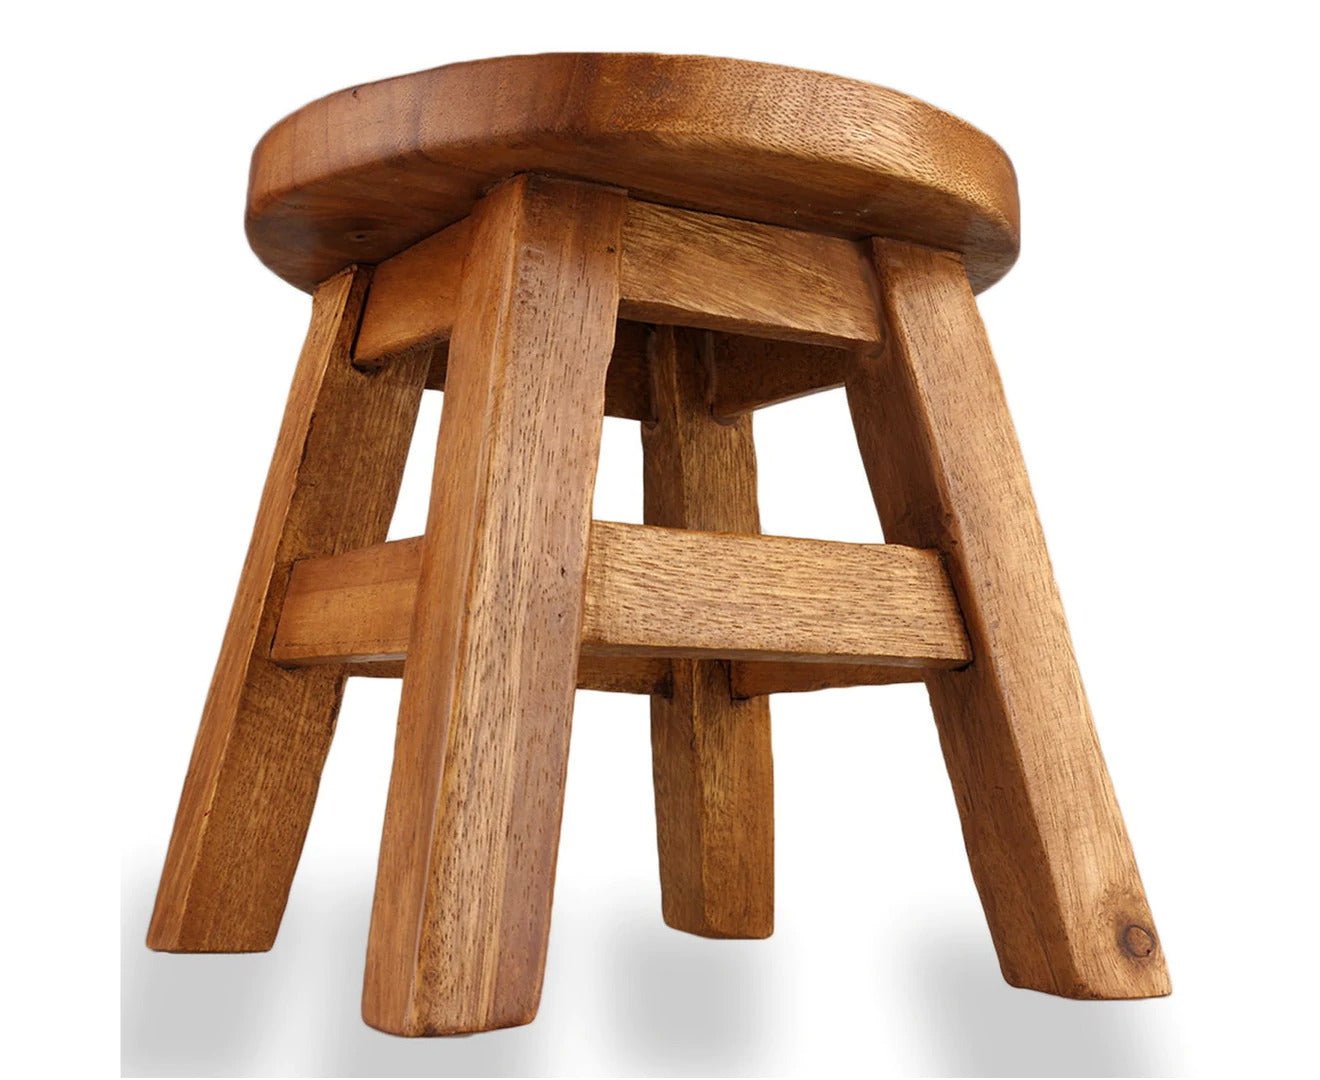 Kids furniture Wooden Stool Puppy Dog Chair Toddlers Step Sitting - Little Kids Business